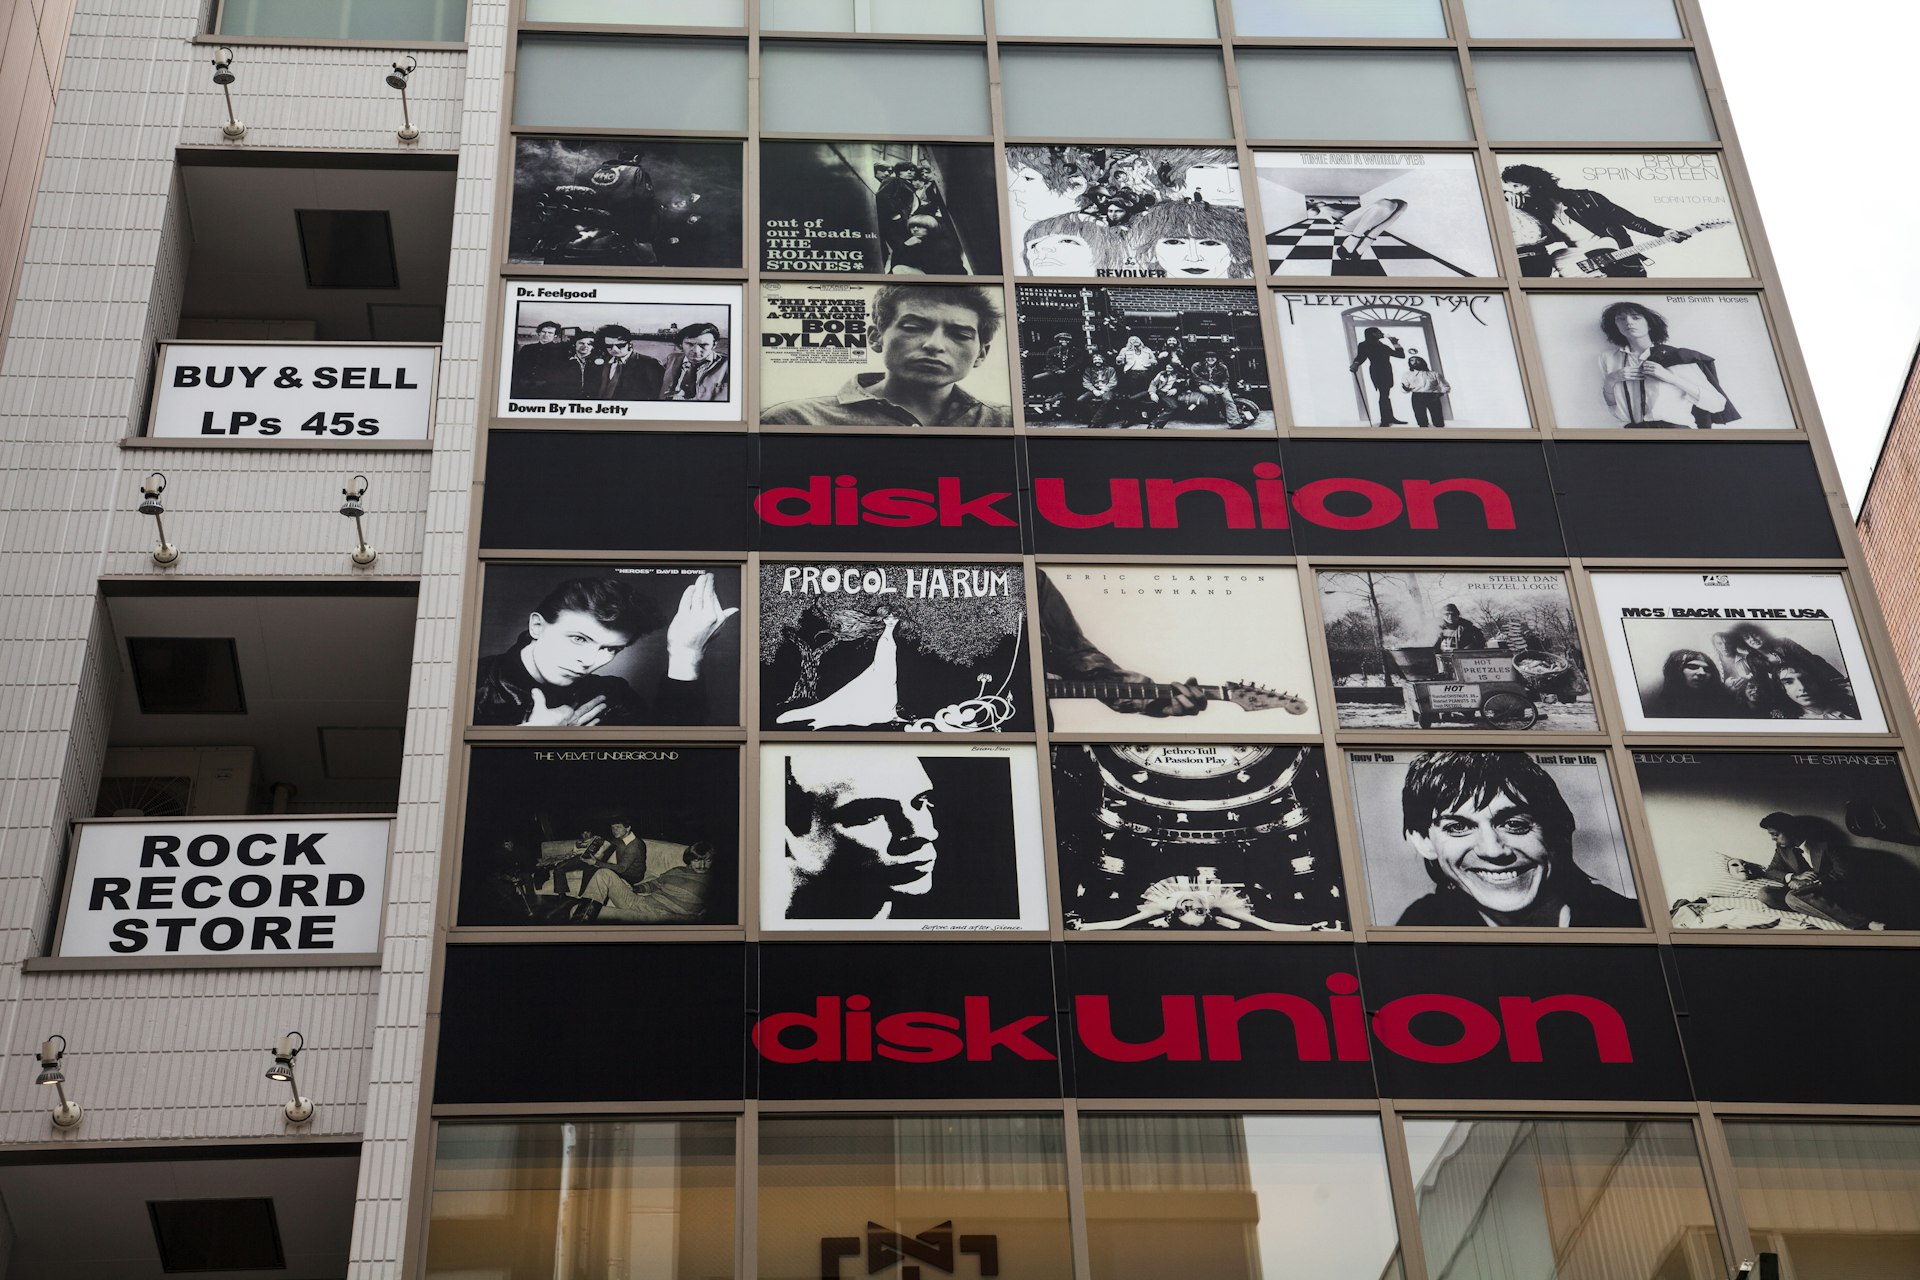 The facade of the disk union building in Tokyo's Shinjuku neighborhood puts classic album art in black and white in each window pane, so the building looks like a record bin. Between every two rows of picture-filled windows are long black signs that say "disk union" in a red san serif font.